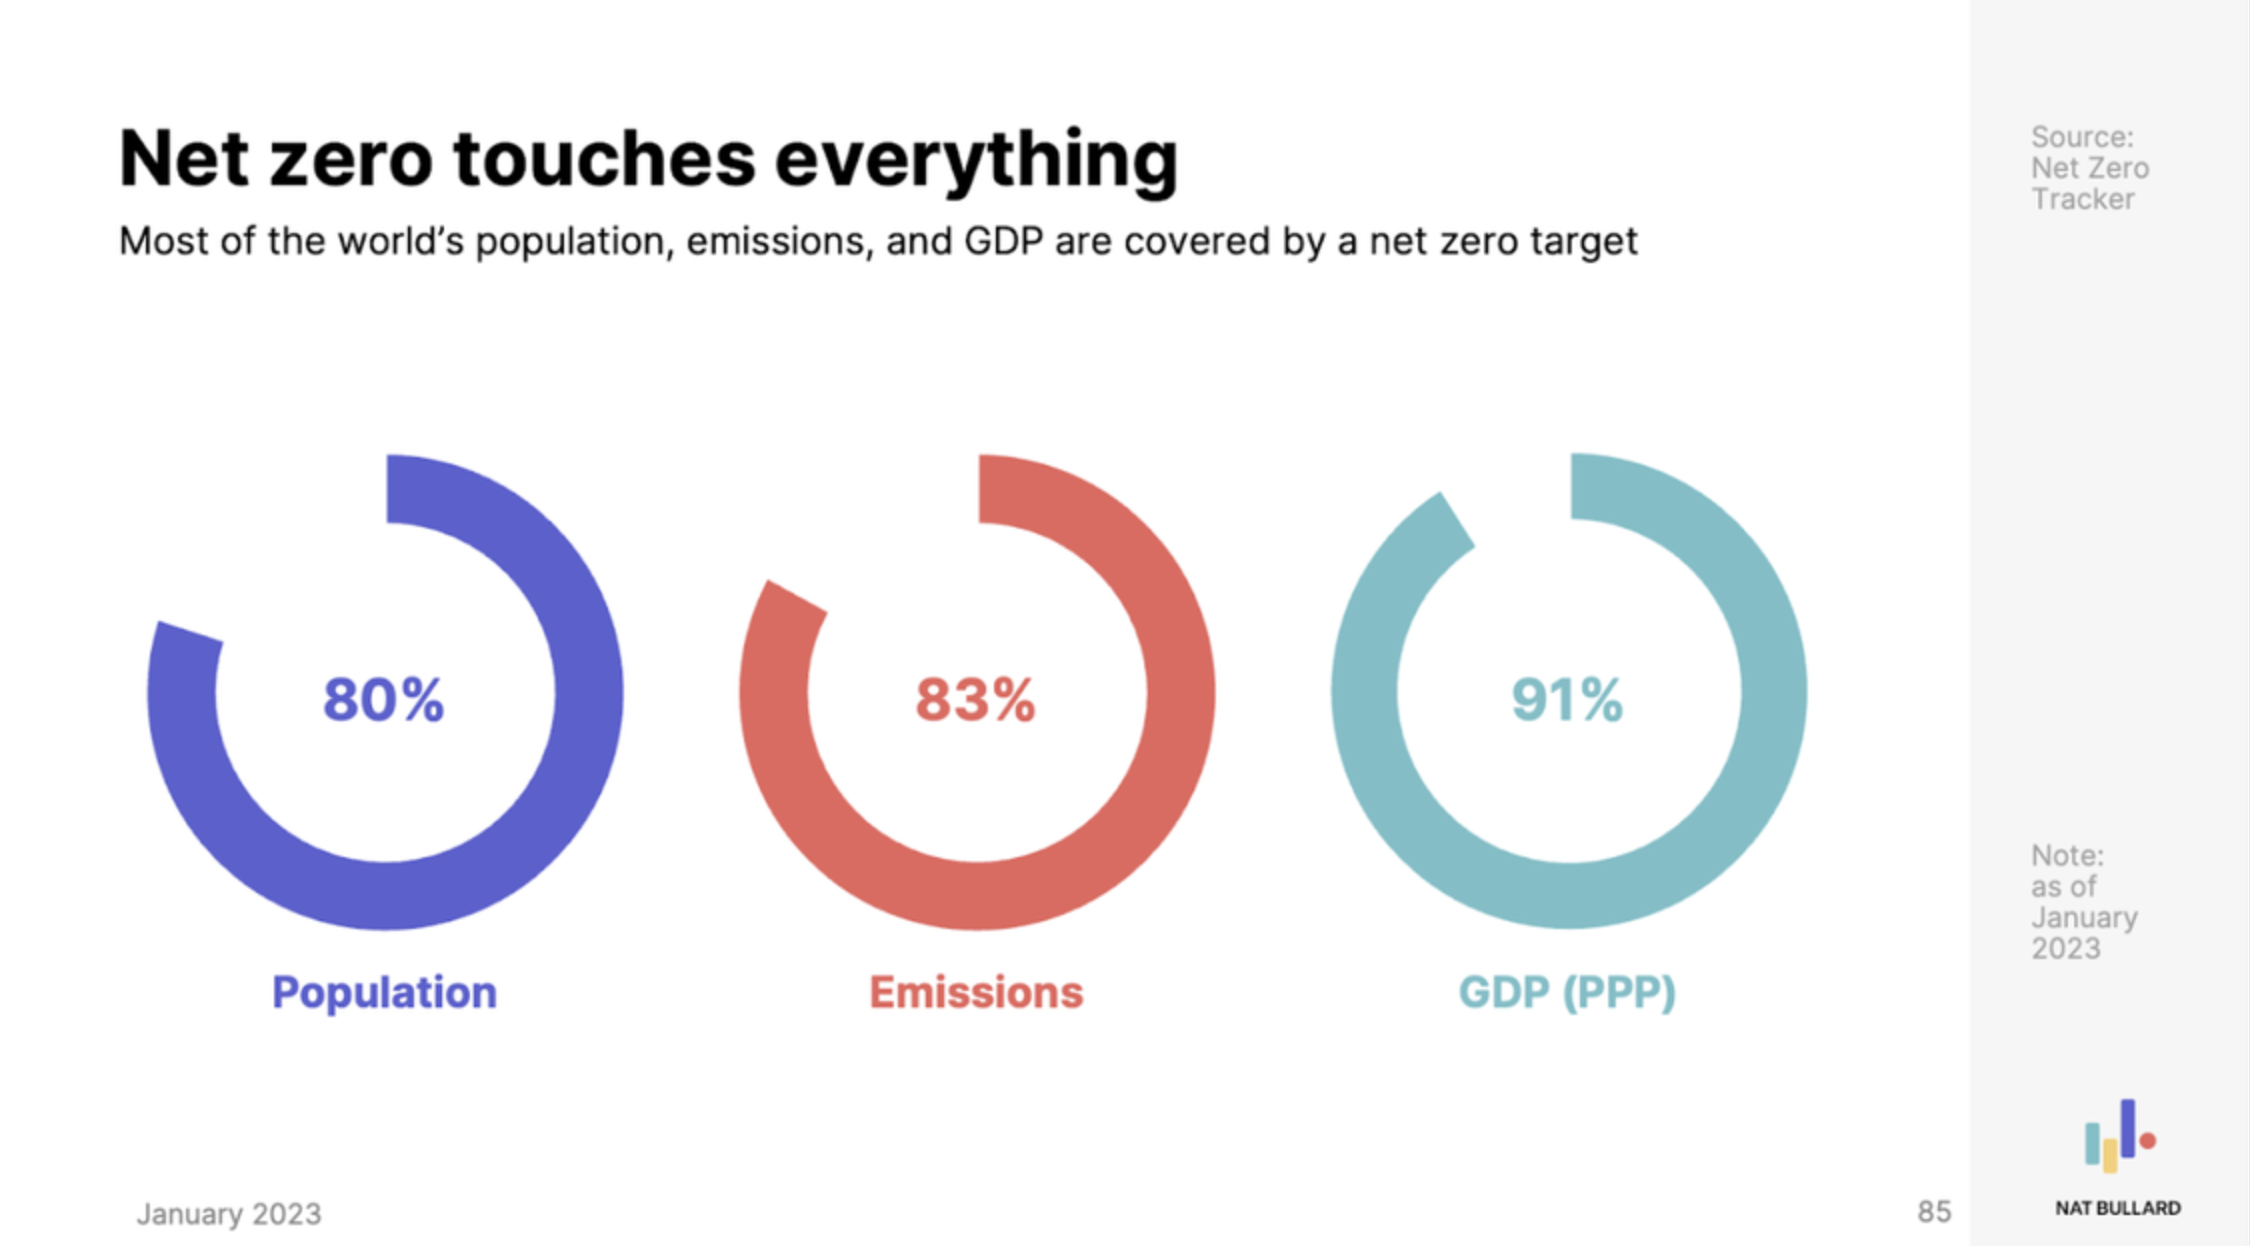 net-zero-touches-everything-population-emissions-gdp.png